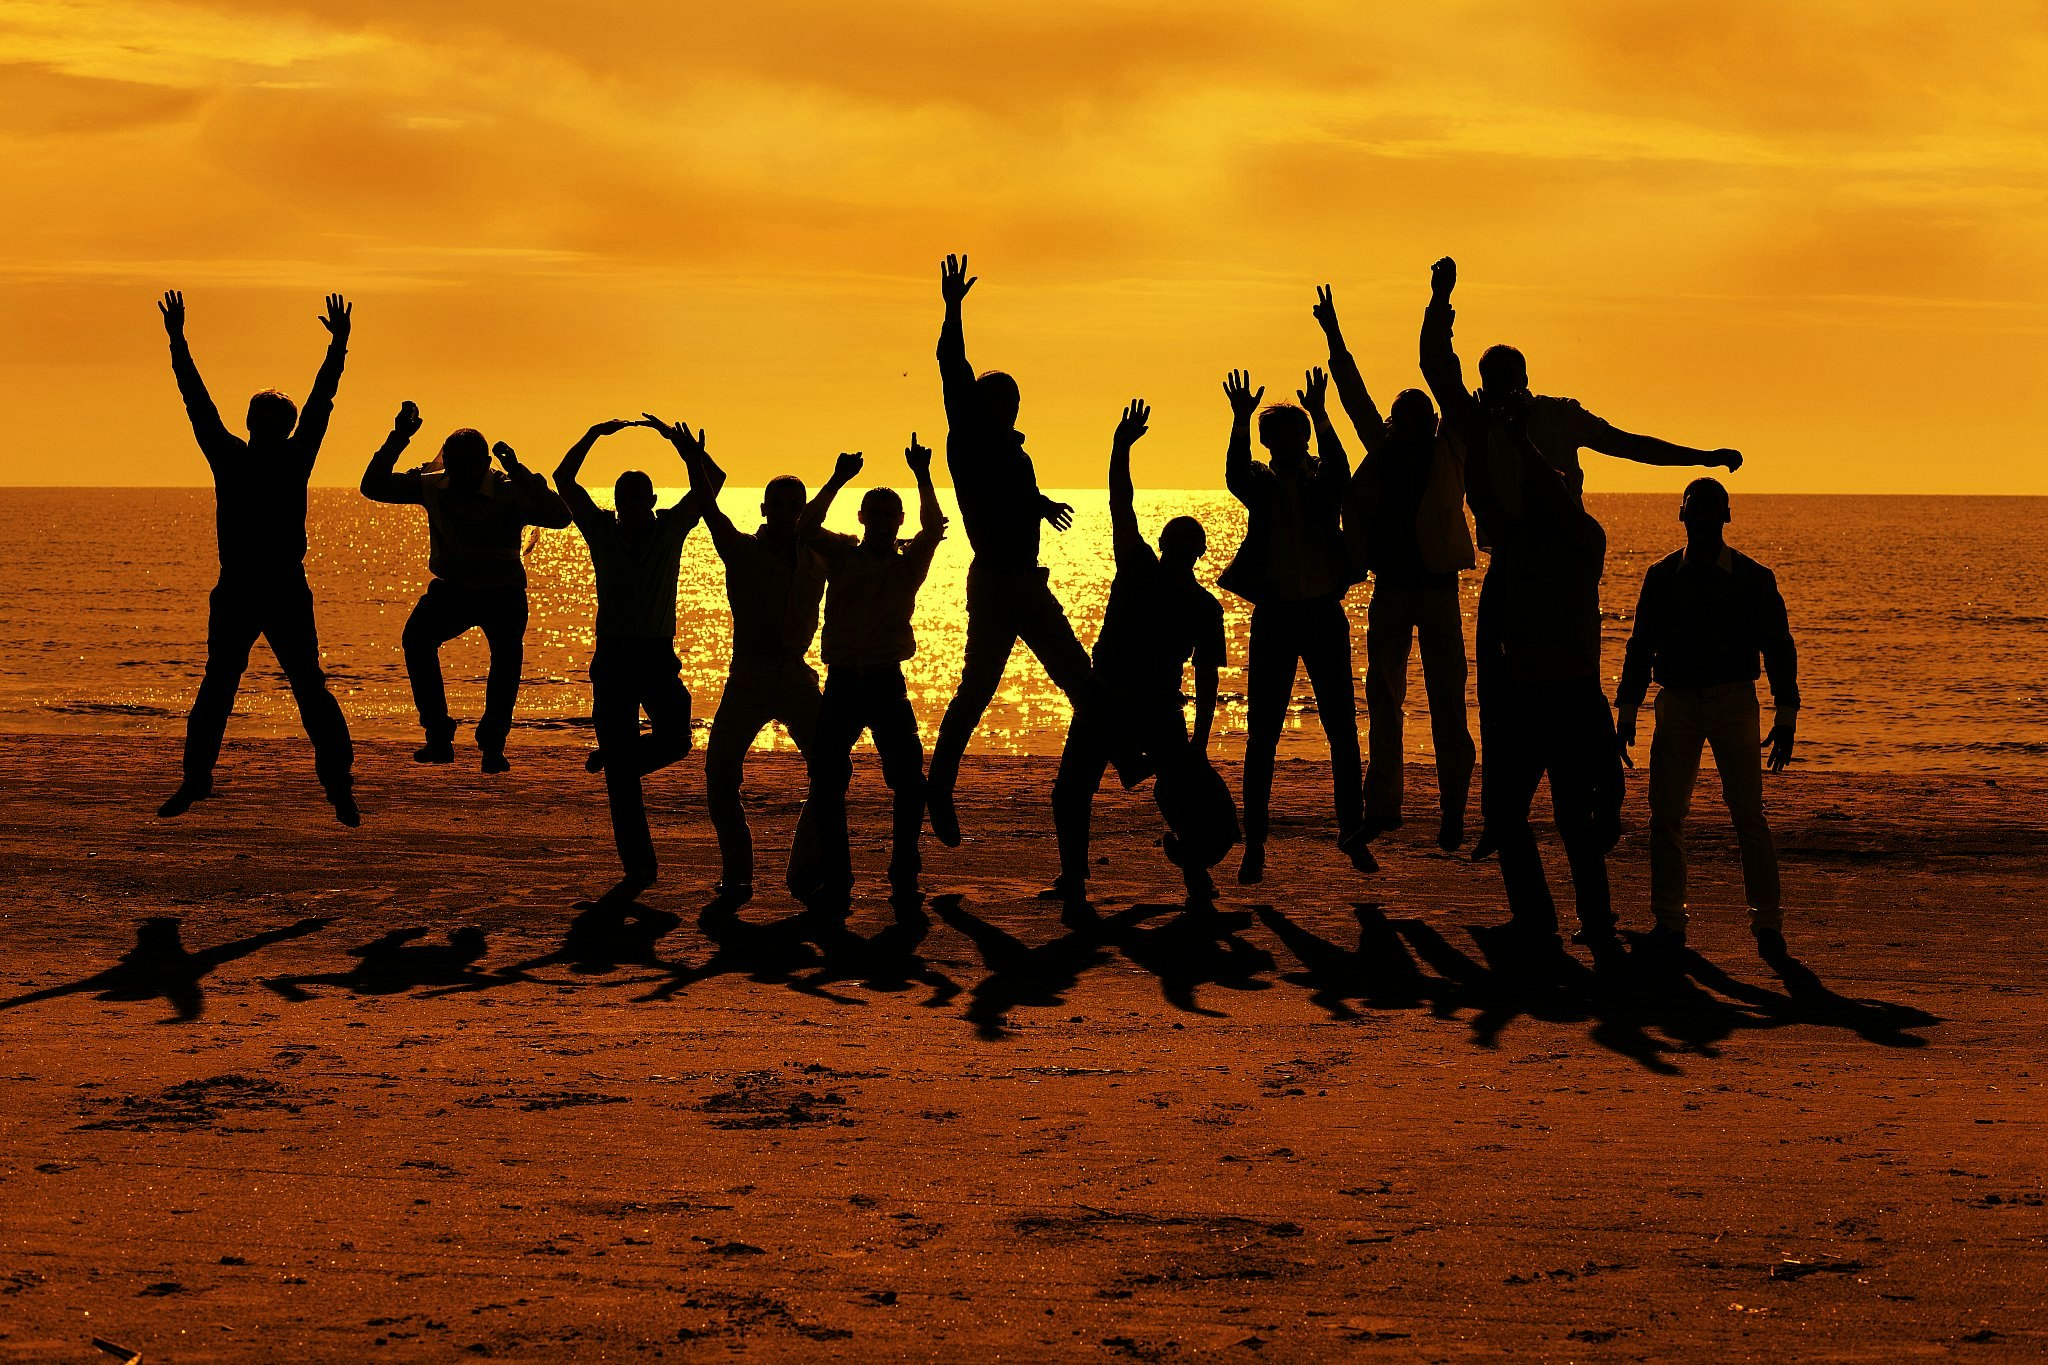 A group of bachelor party attendees silhouetted on a beach against a vivid yellow sunset, jumping up in the air.